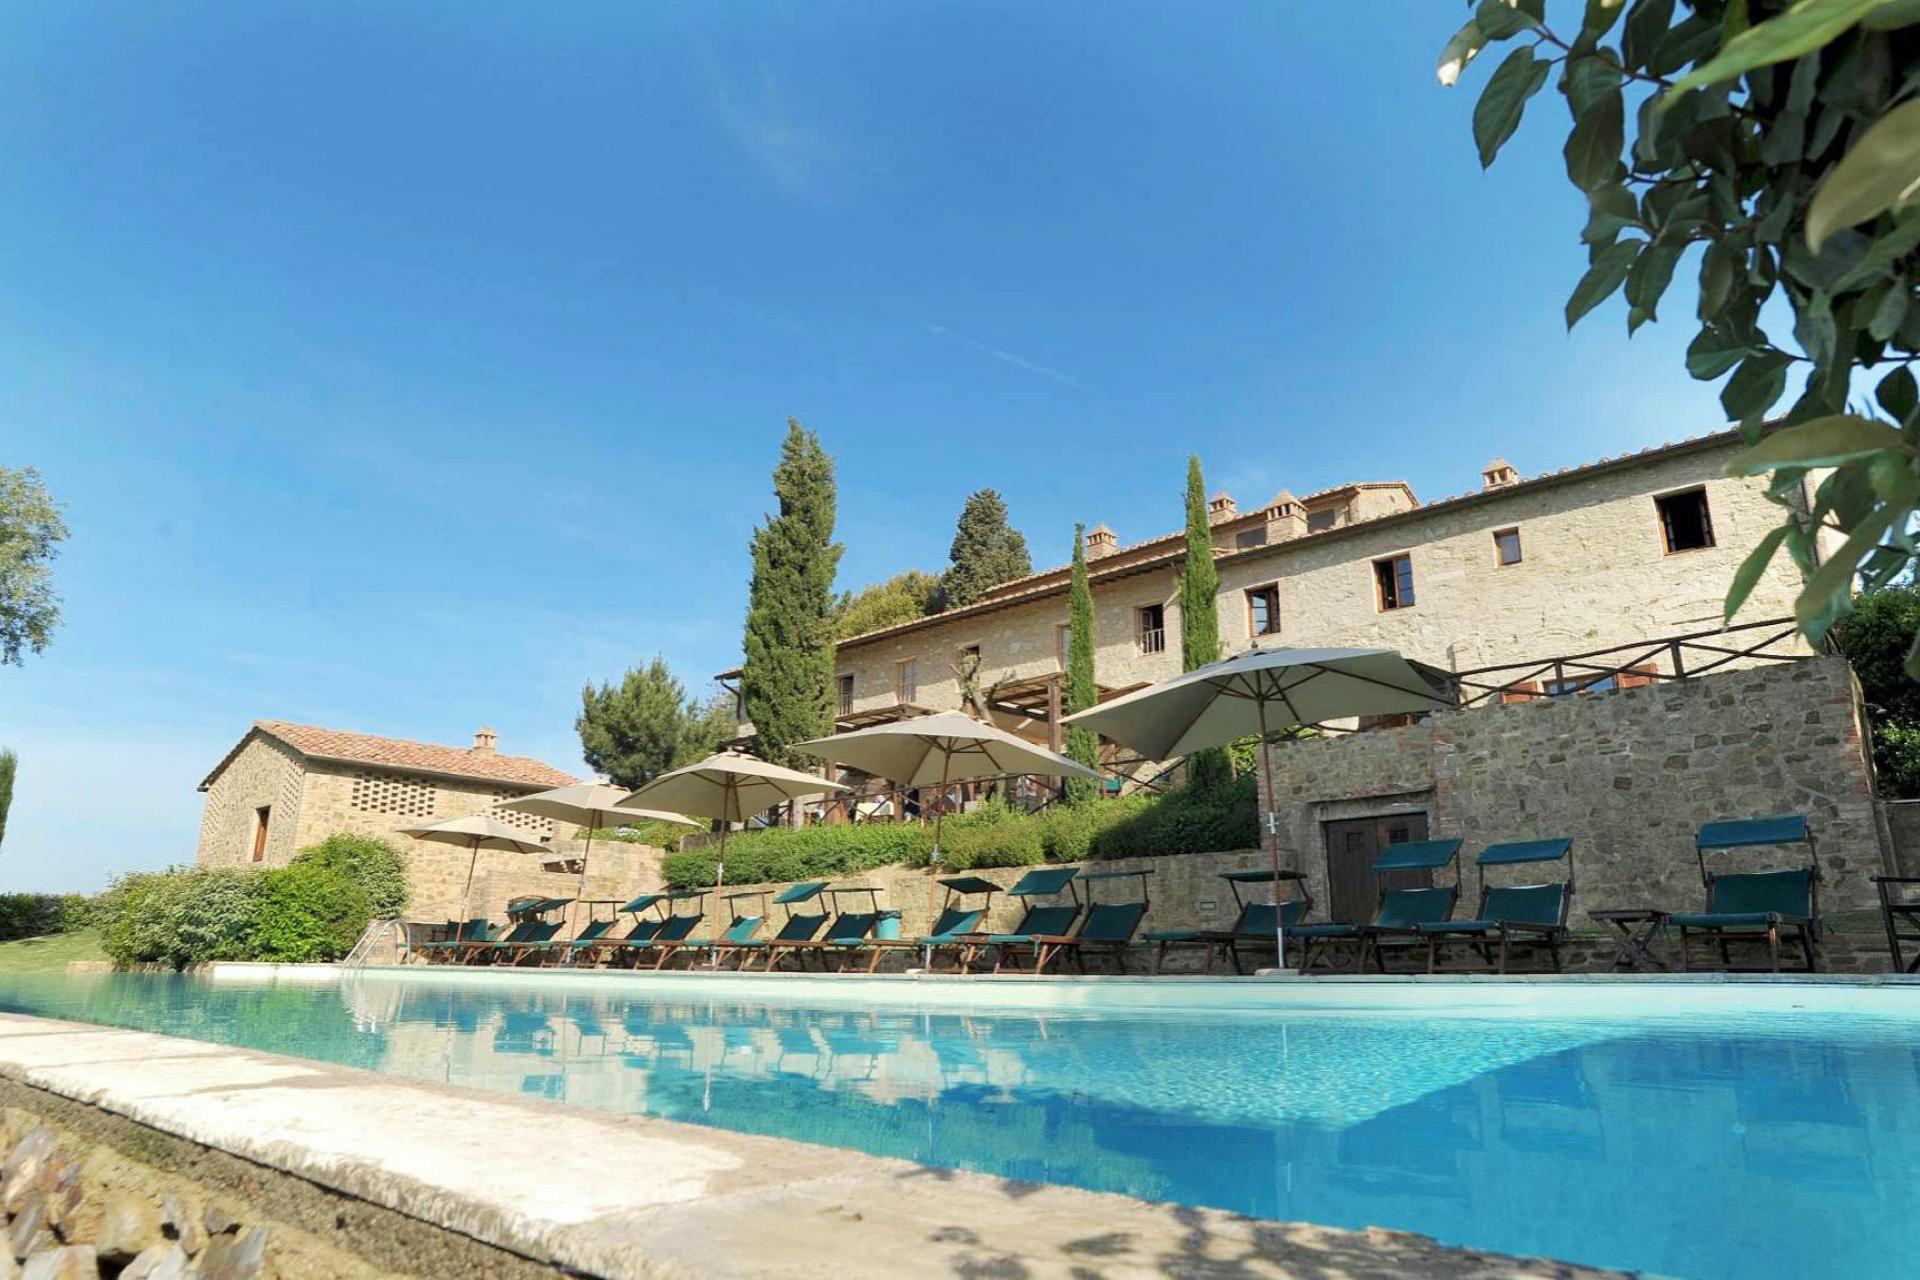 Hospitable agriturismo in central Tuscany